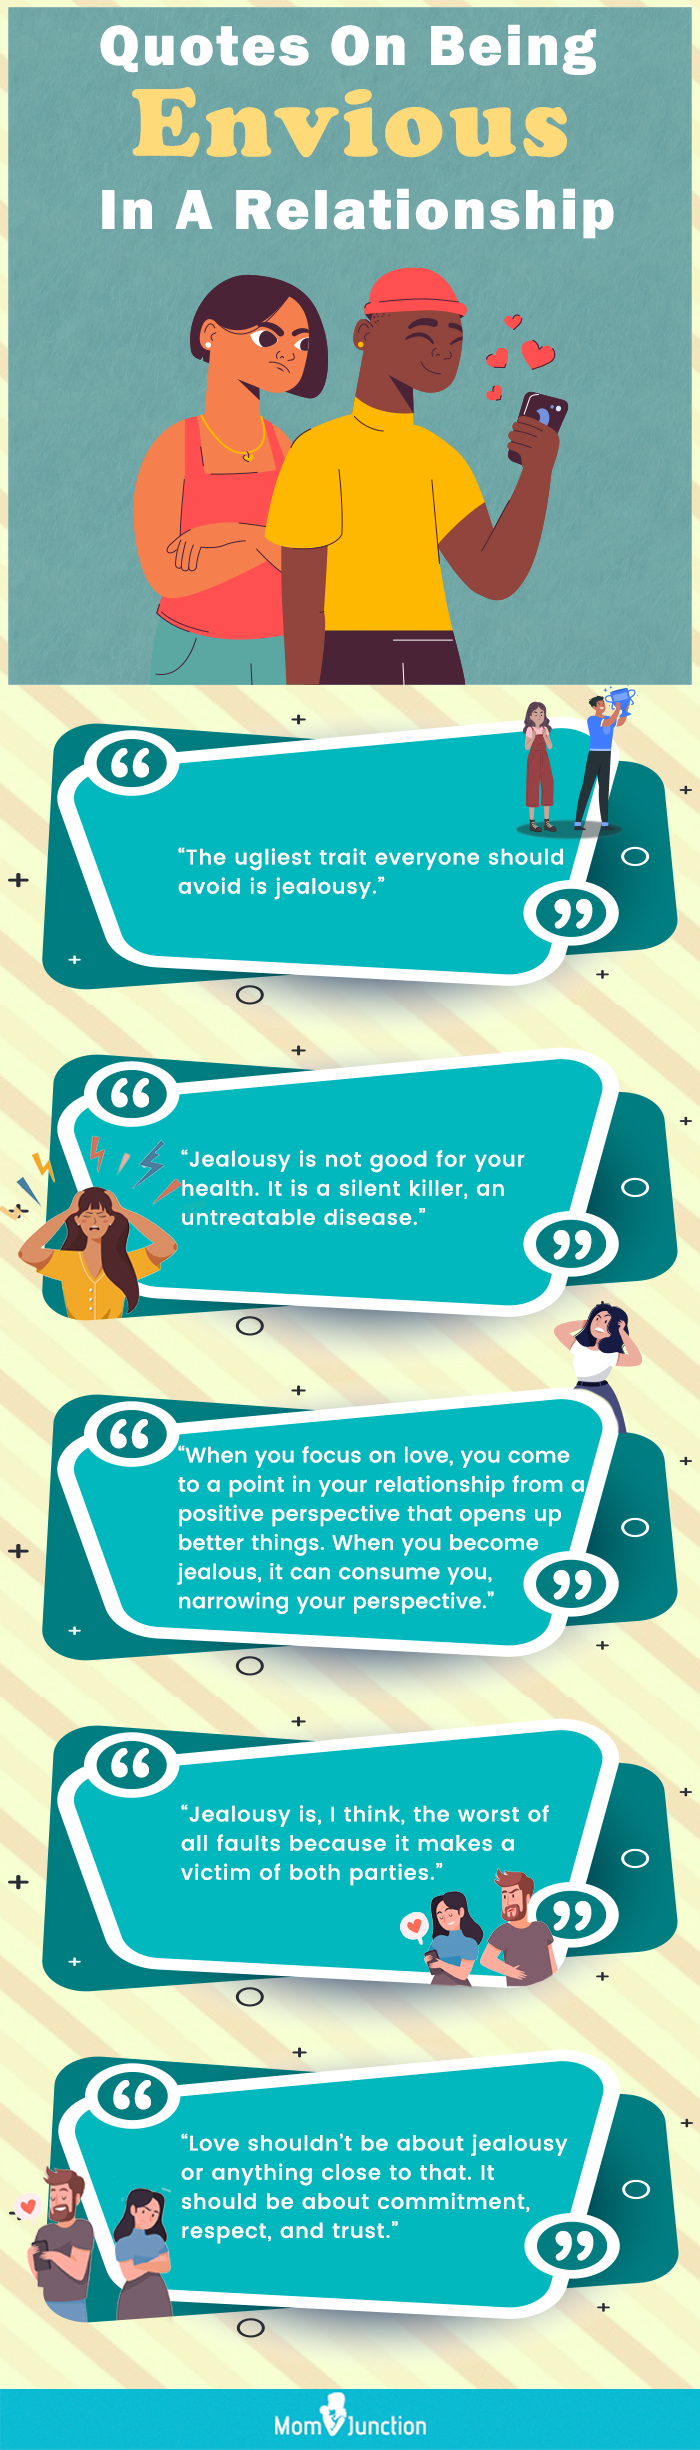 quotes about jealousy in a relationship (infographic)